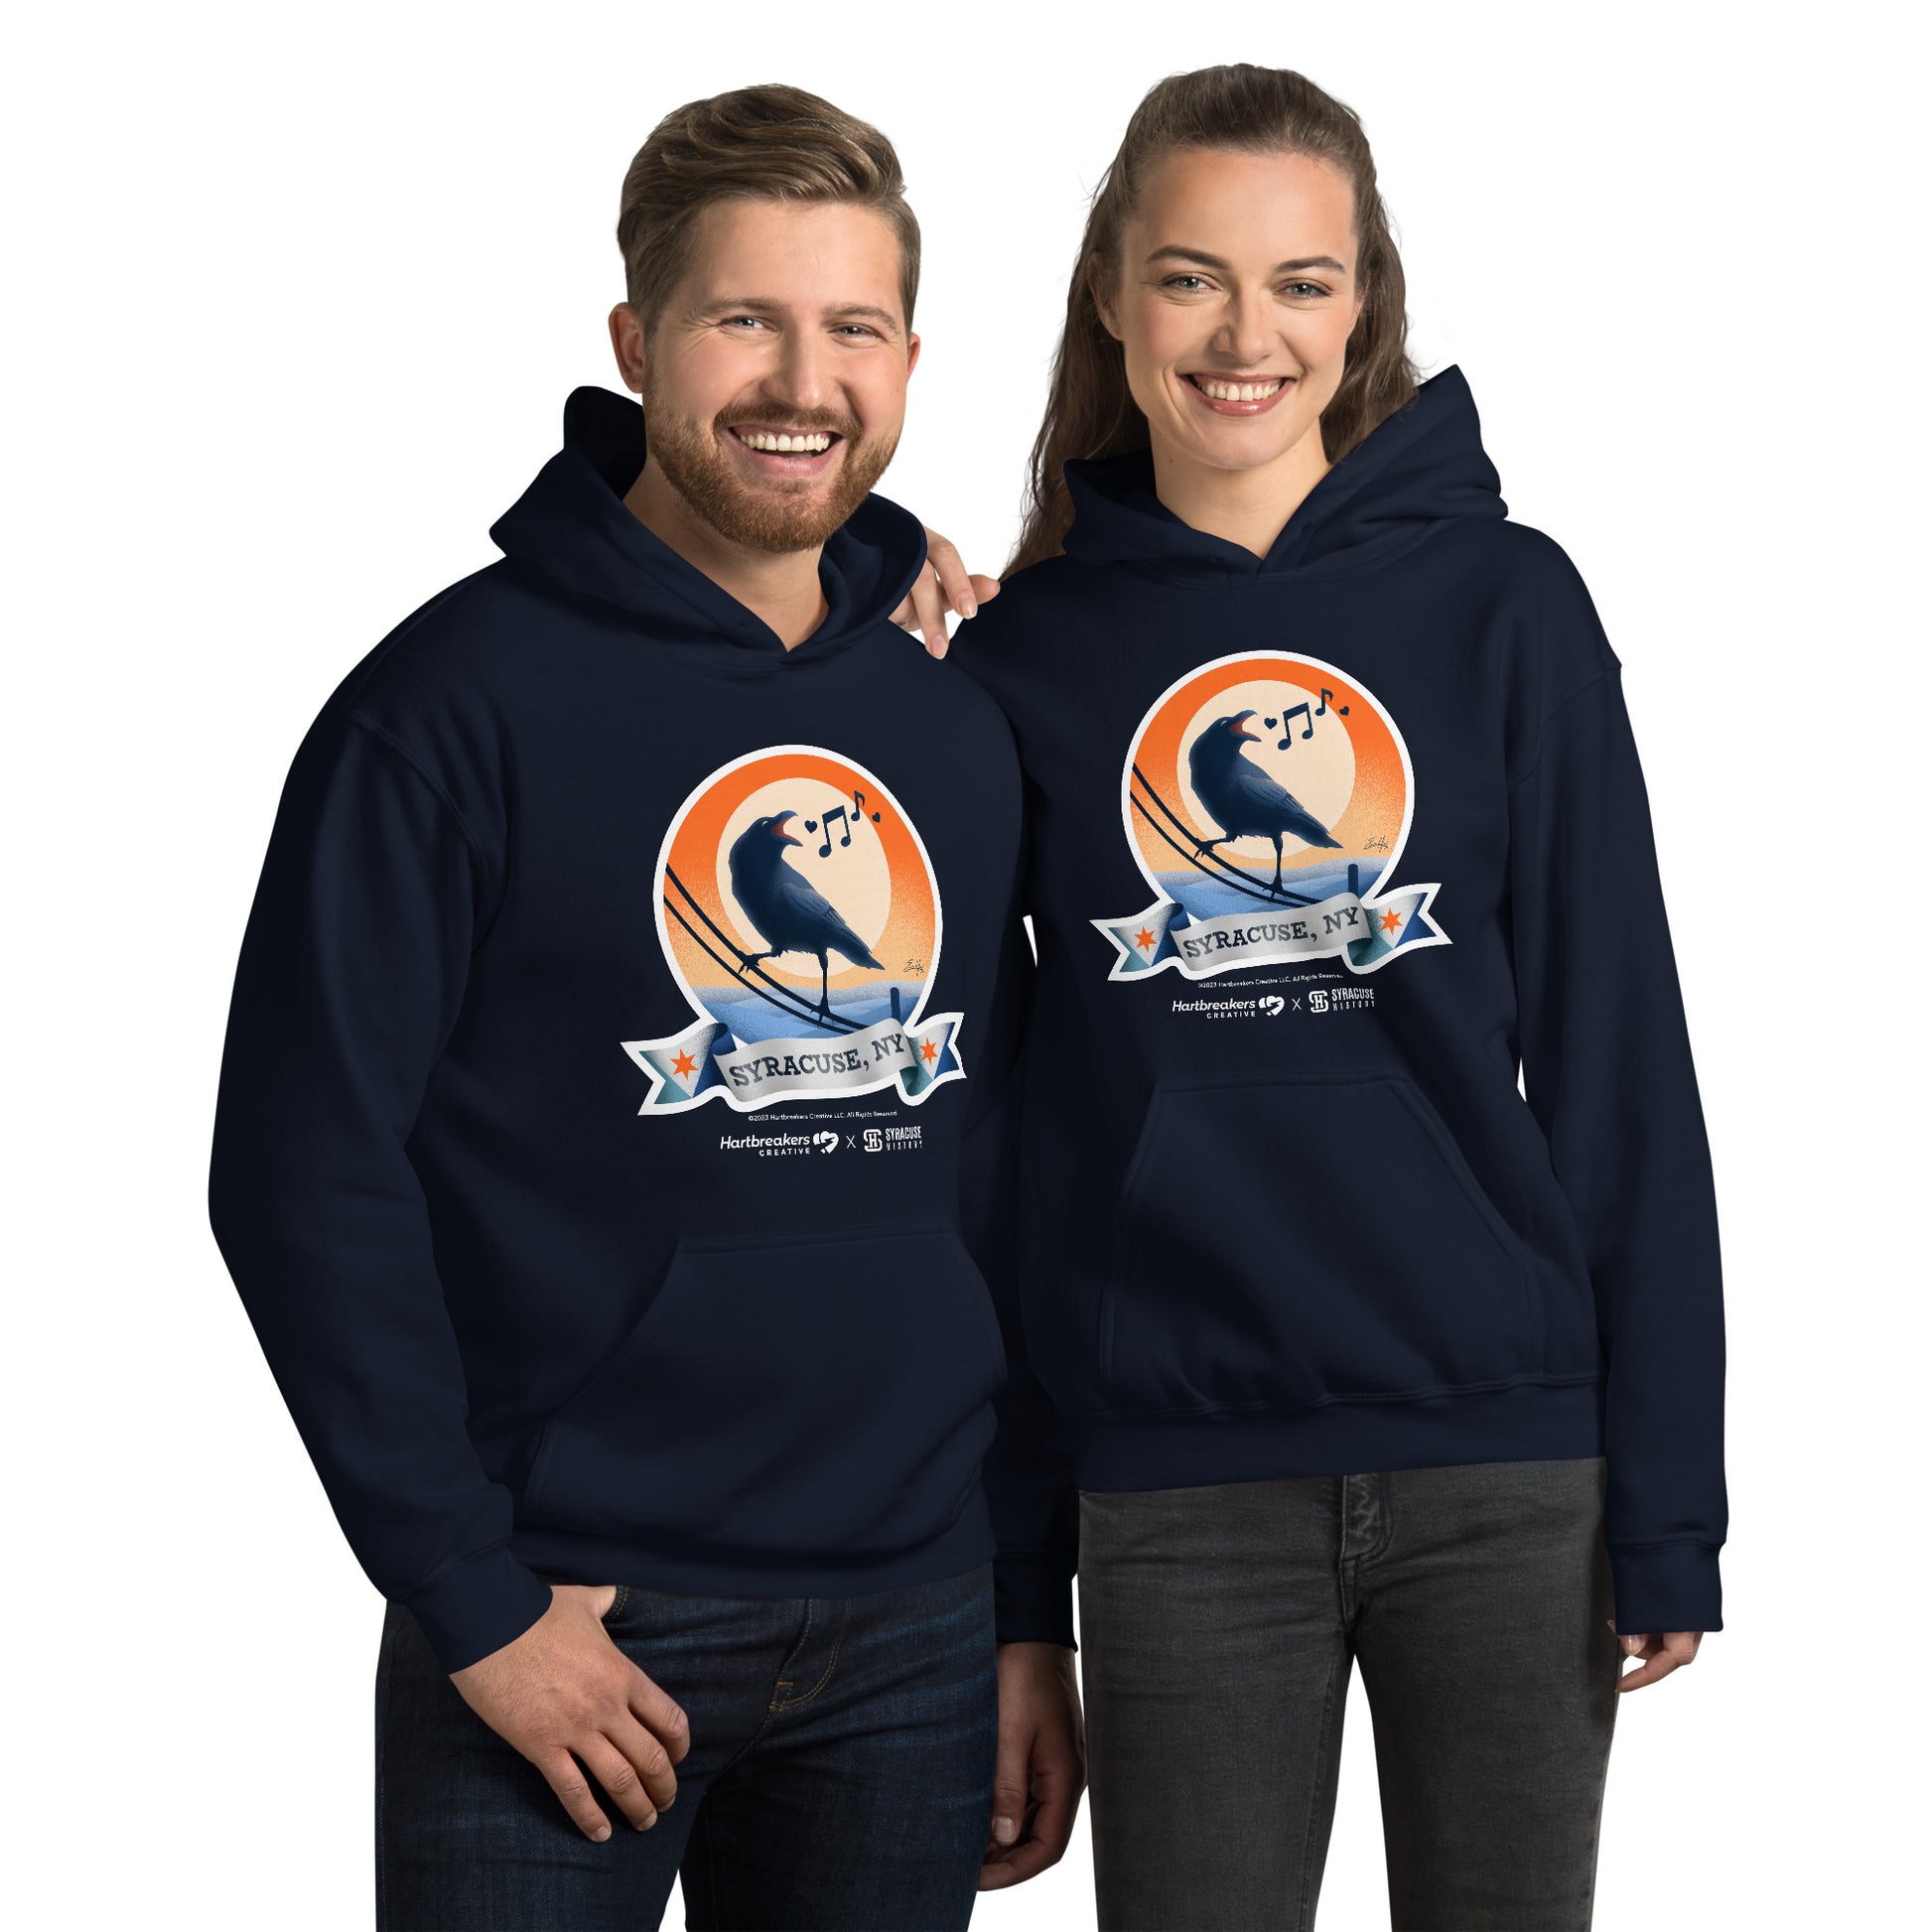 A man and woman wearing navy hoodies featuring an illustration of a crow on a telephone wire and a banner beneath it that says Syracuse, NY